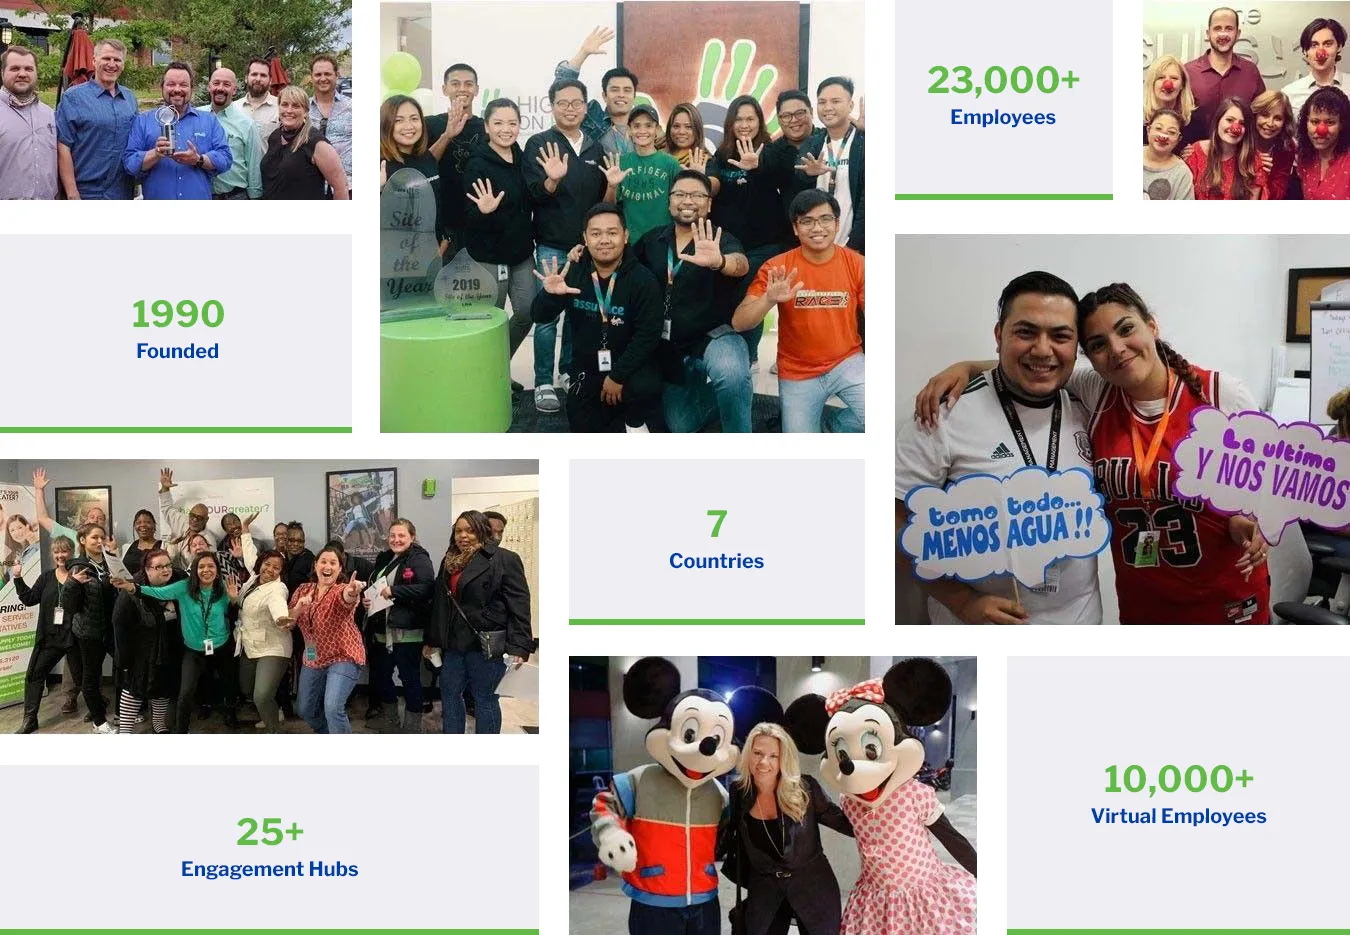 ResultsCX was founded in 1990, is present in 5 countries, has 30 engagement centers, and consists of 20,000 employees working in our different branches as well as 9,500 employees working remotely.